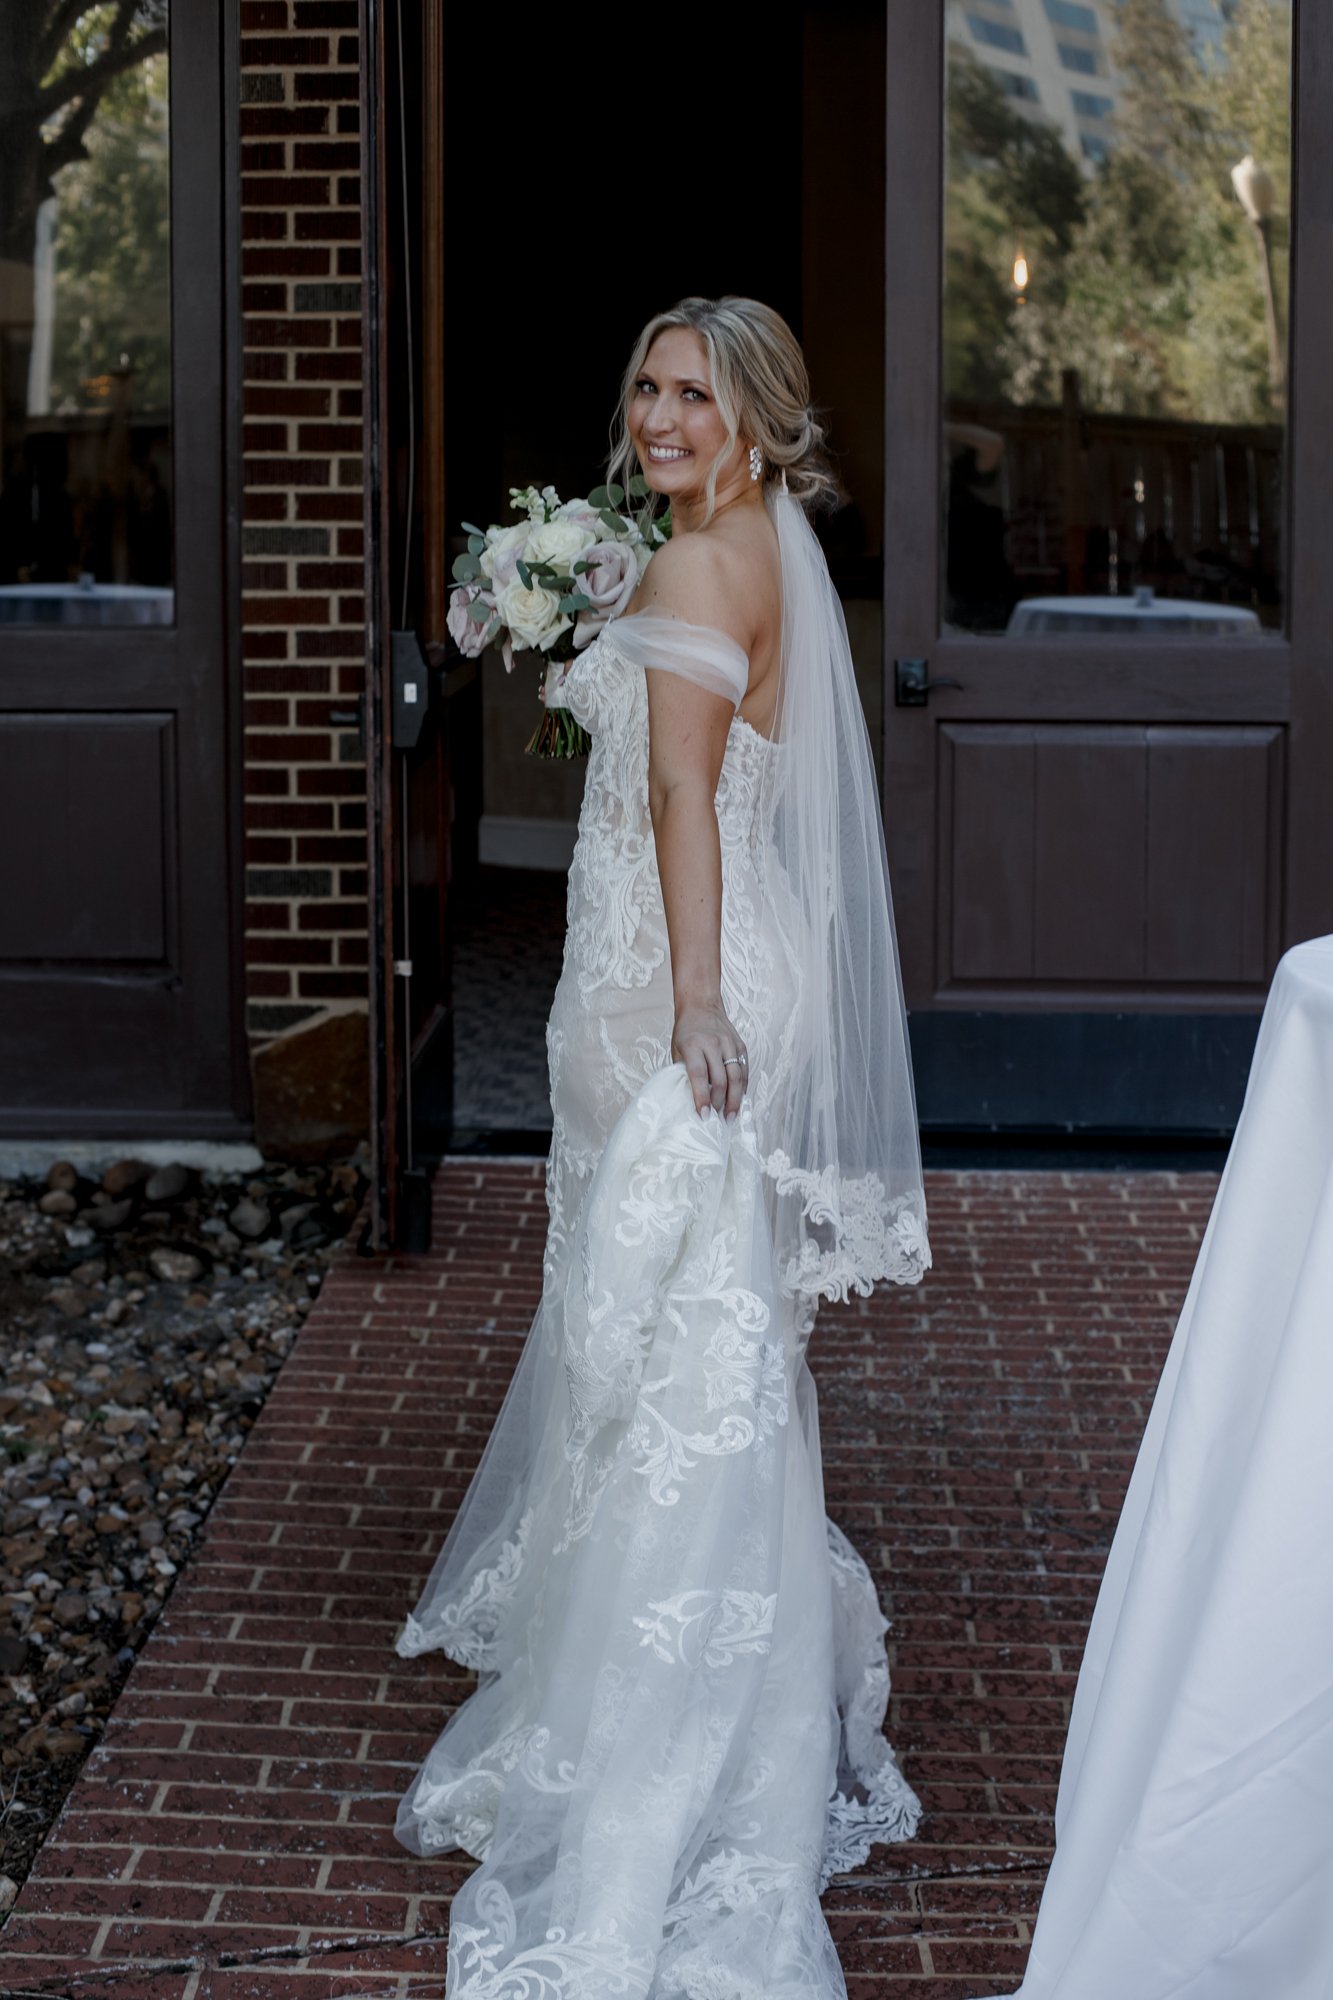 Outdoors Bridal portraits. Elegant and Glamorous Uptown Wedding at Omni Houston Hotel and The Wynden